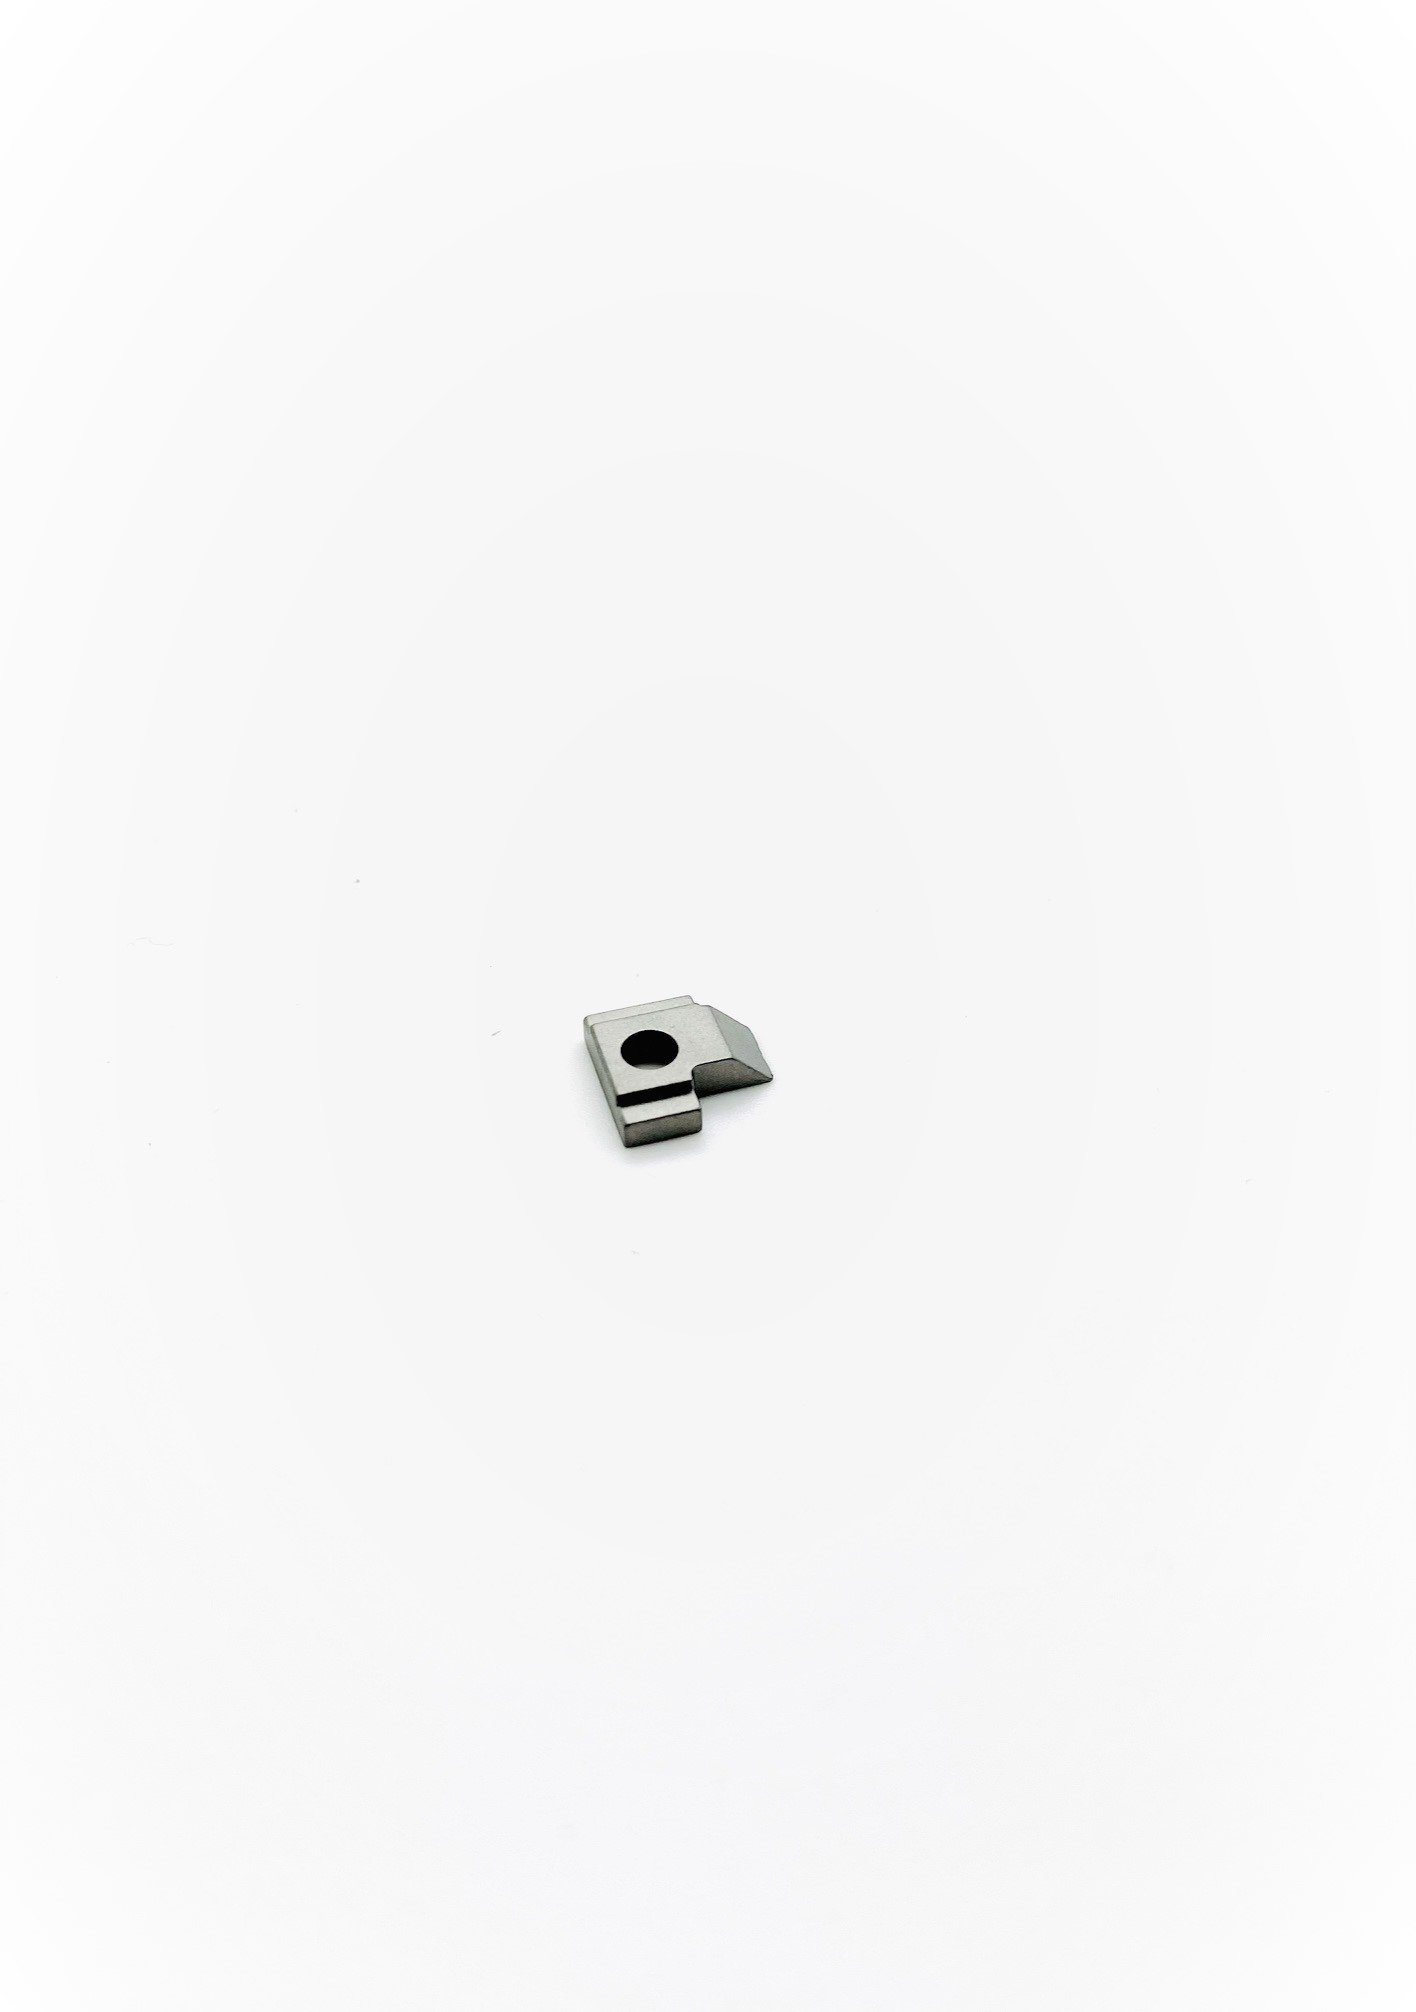 Firing Pin Stop for Trophy saw and all SAS II standard